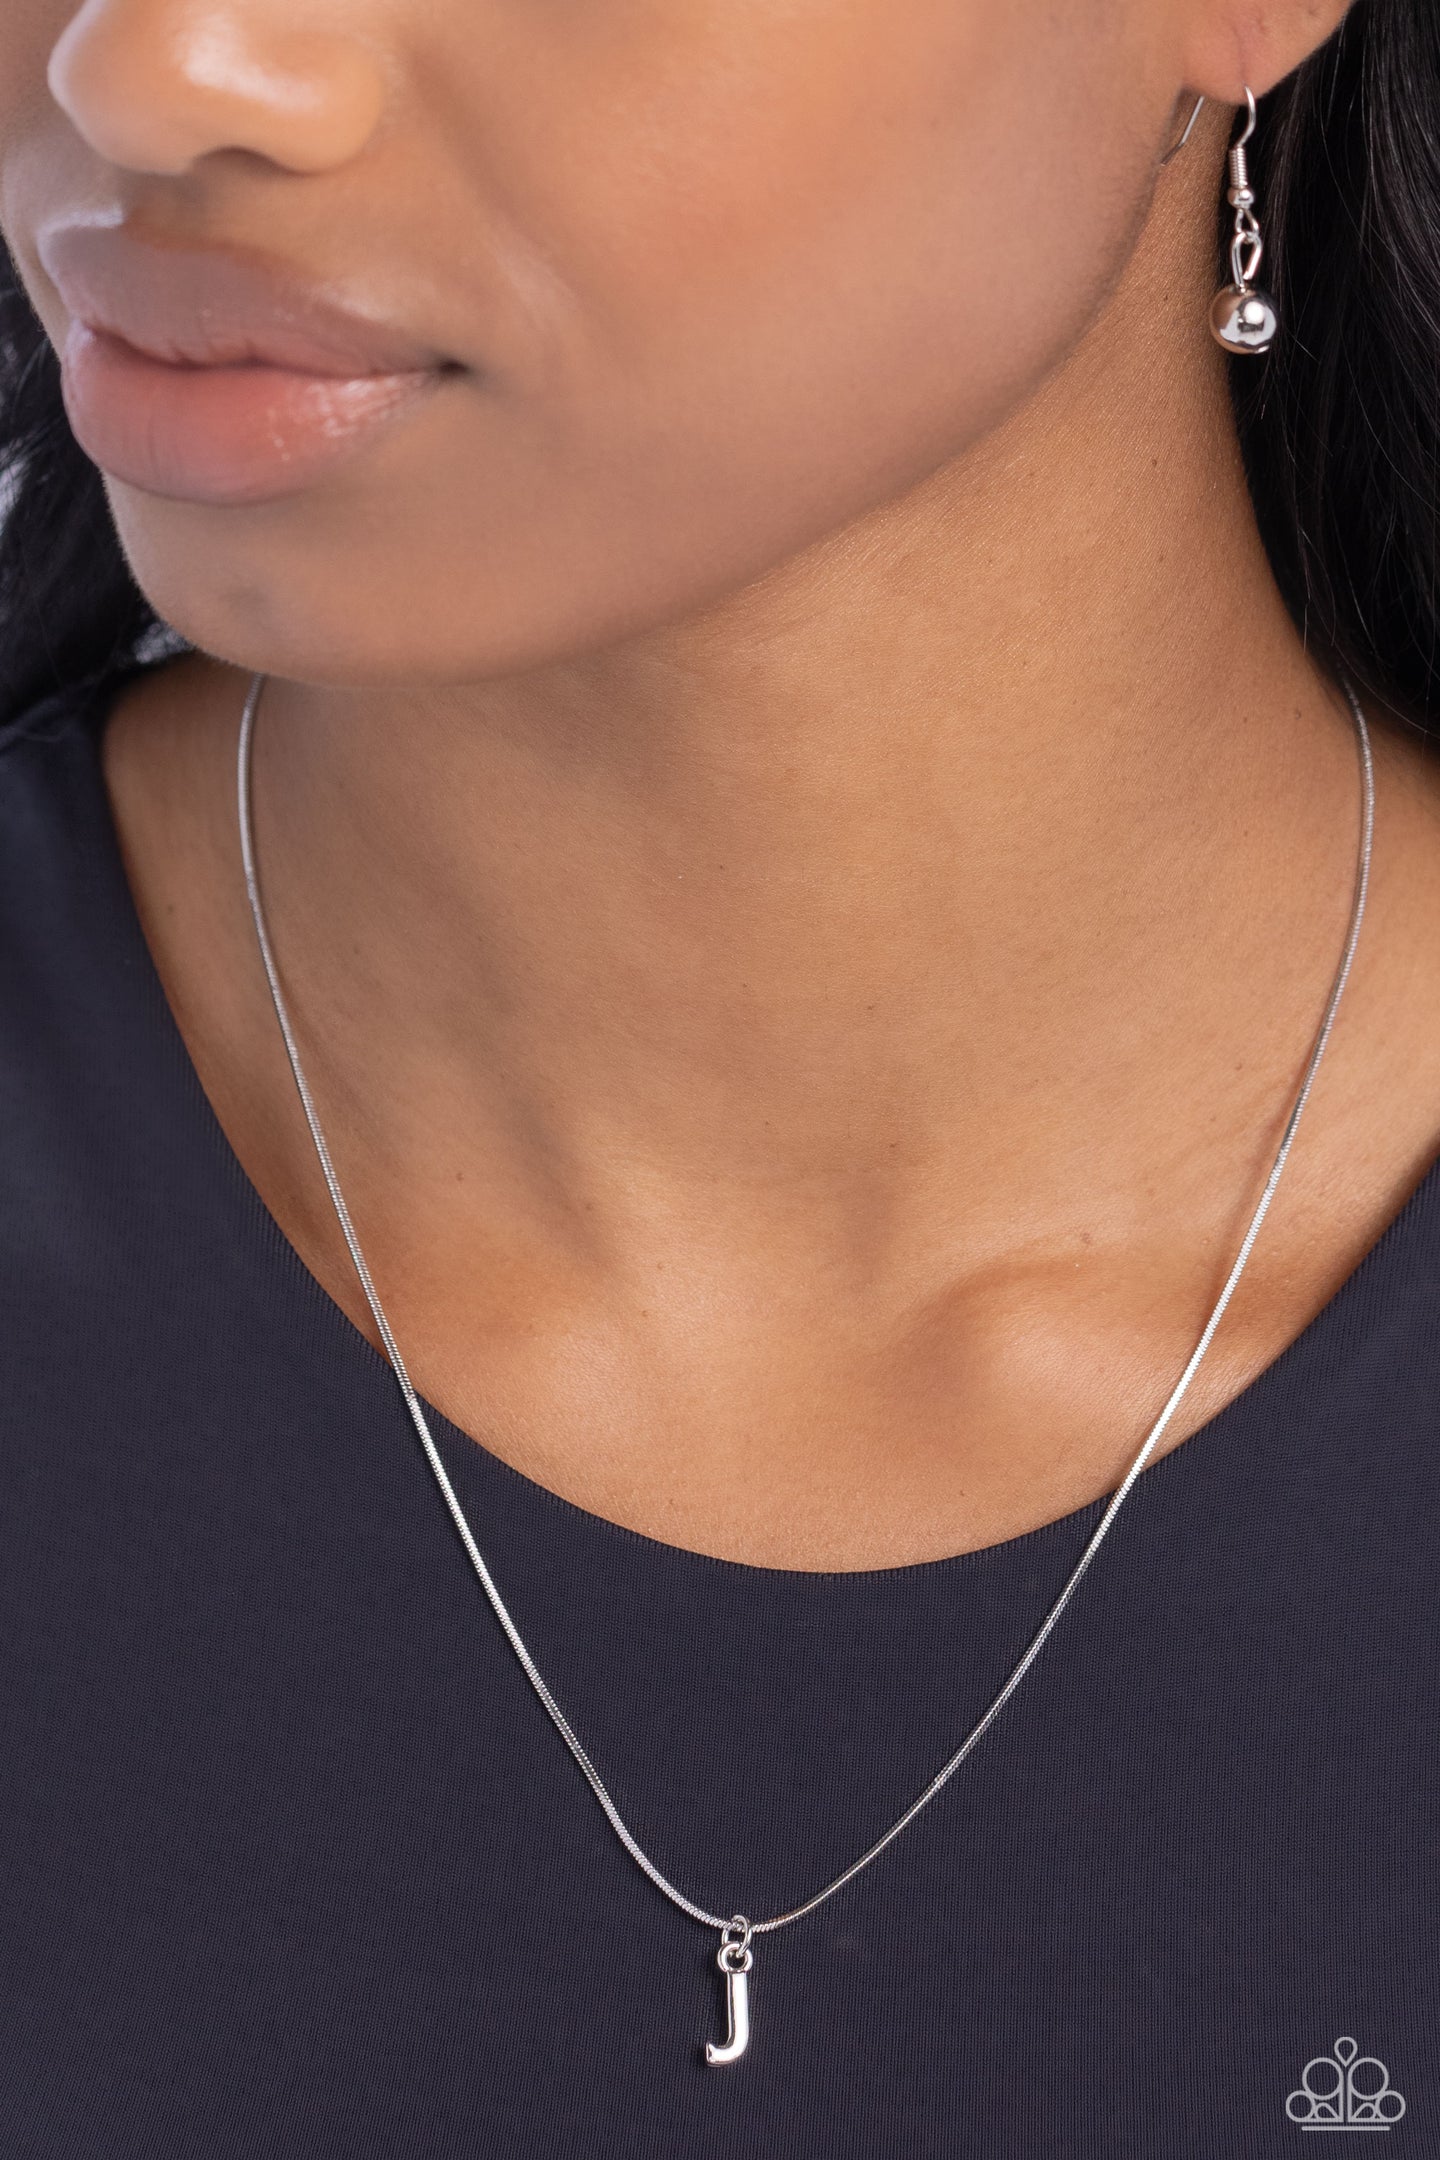 Seize the Initial - Silver - J necklace